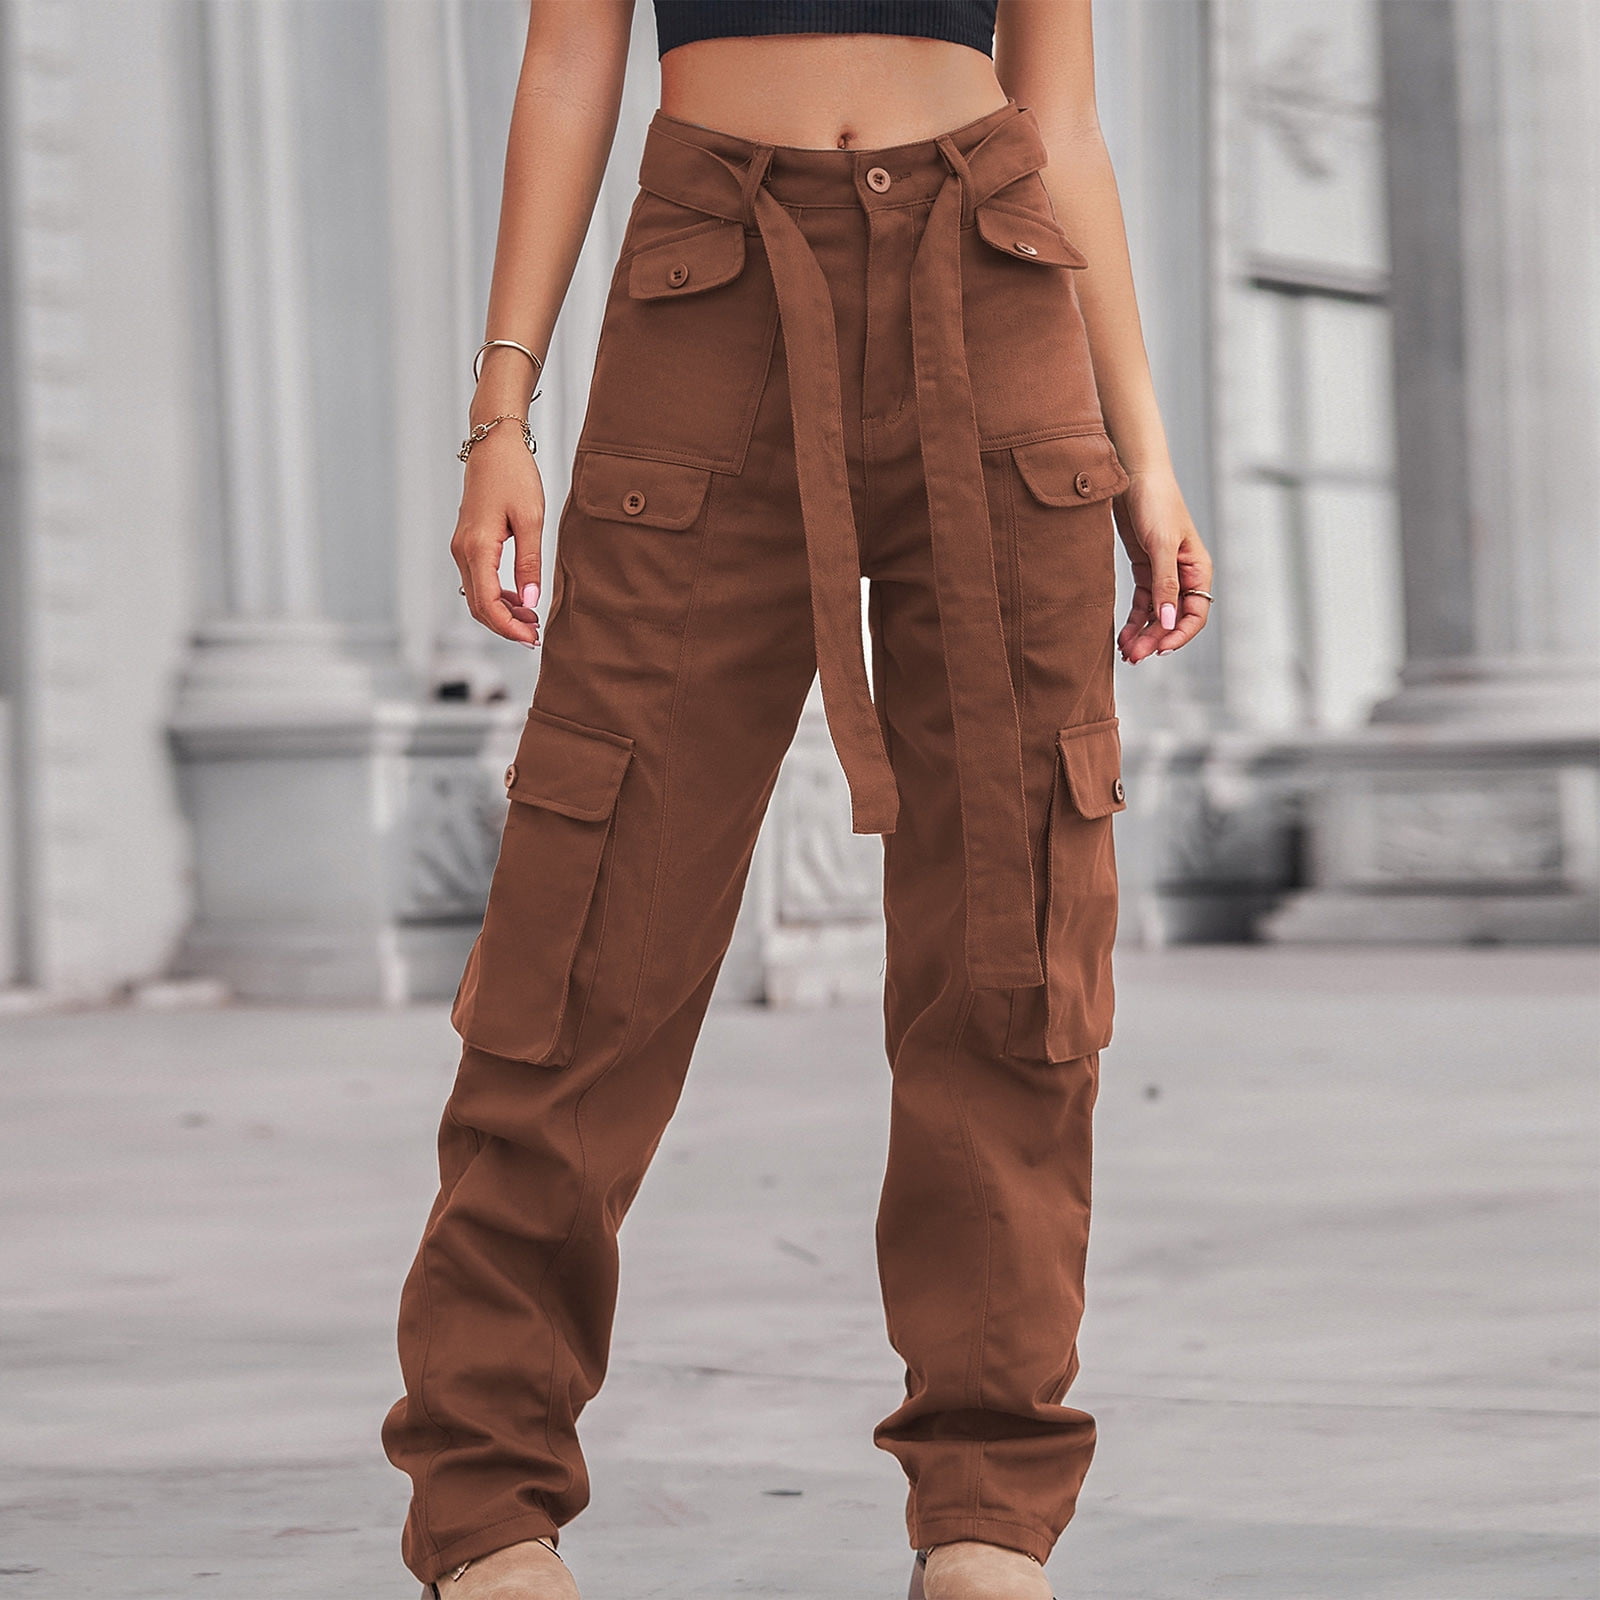 DOLKFU Cargo Pants for Women High Waisted Travel Streetwear Casual Straight  Pants with Pockets Drawstring Wide Leg Trousers 